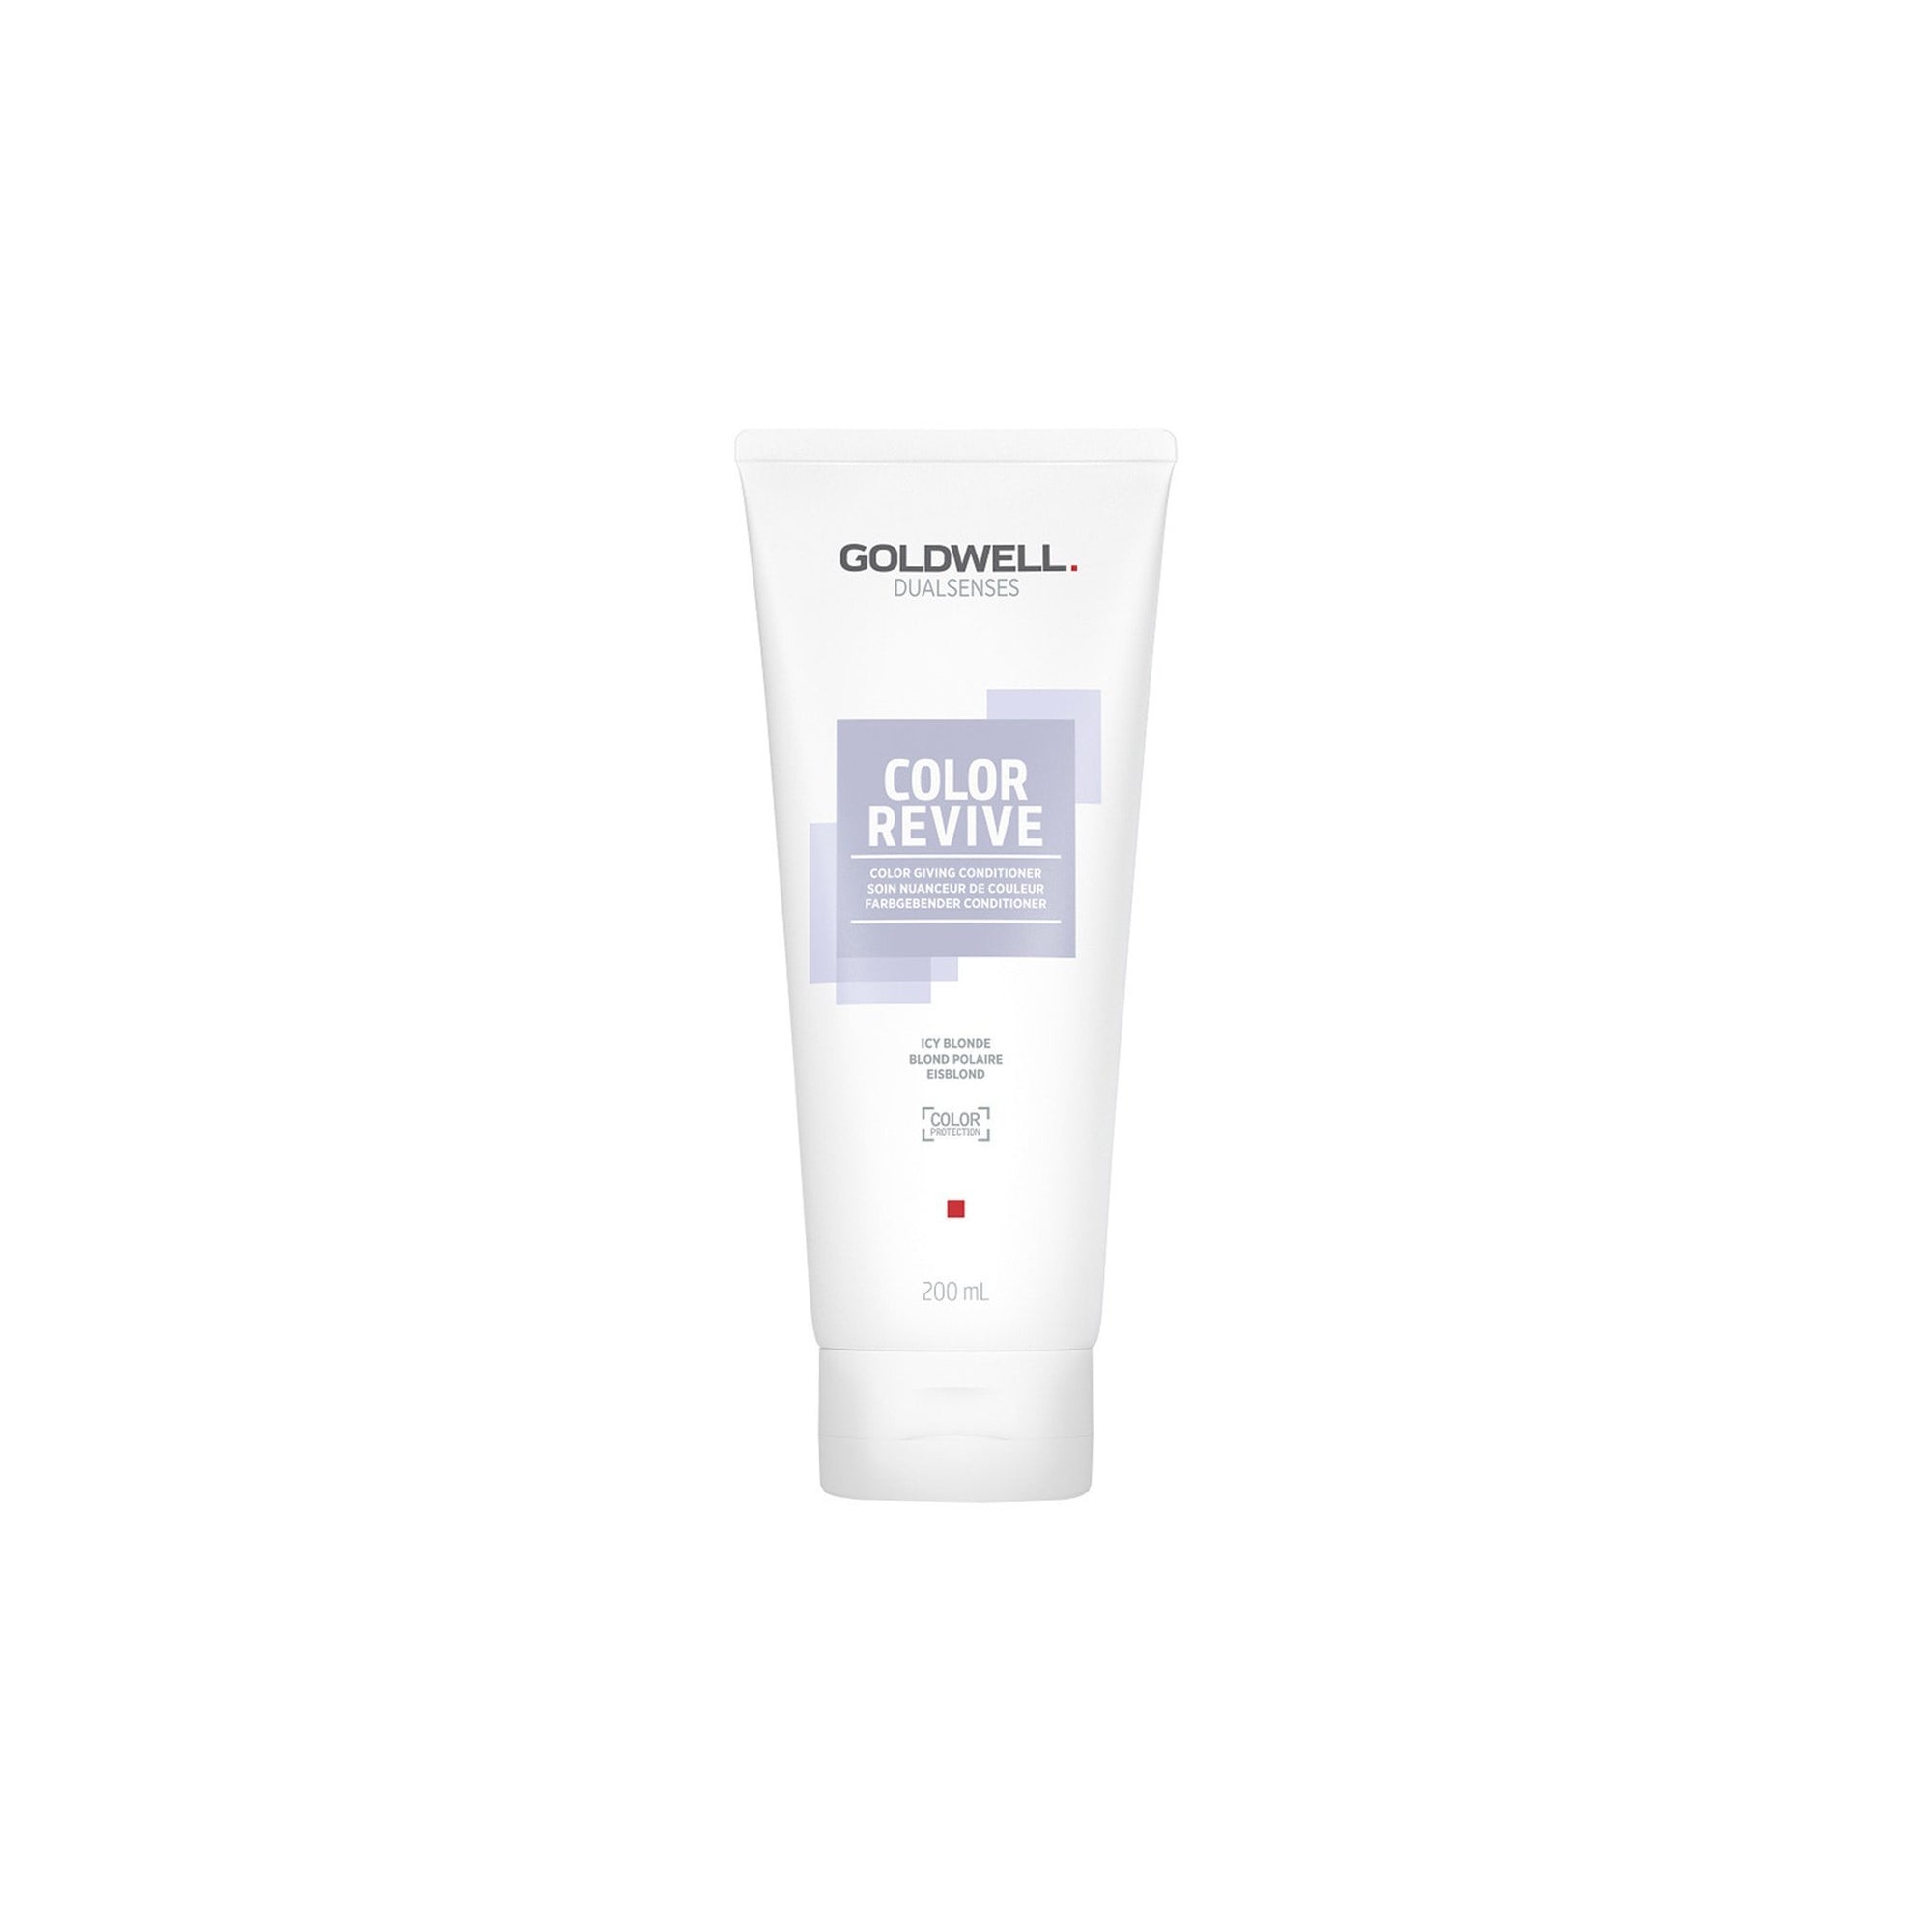 Goldwell Dualsenses Color Revive Color Giving Conditioner 200 ml - Icy Blonde